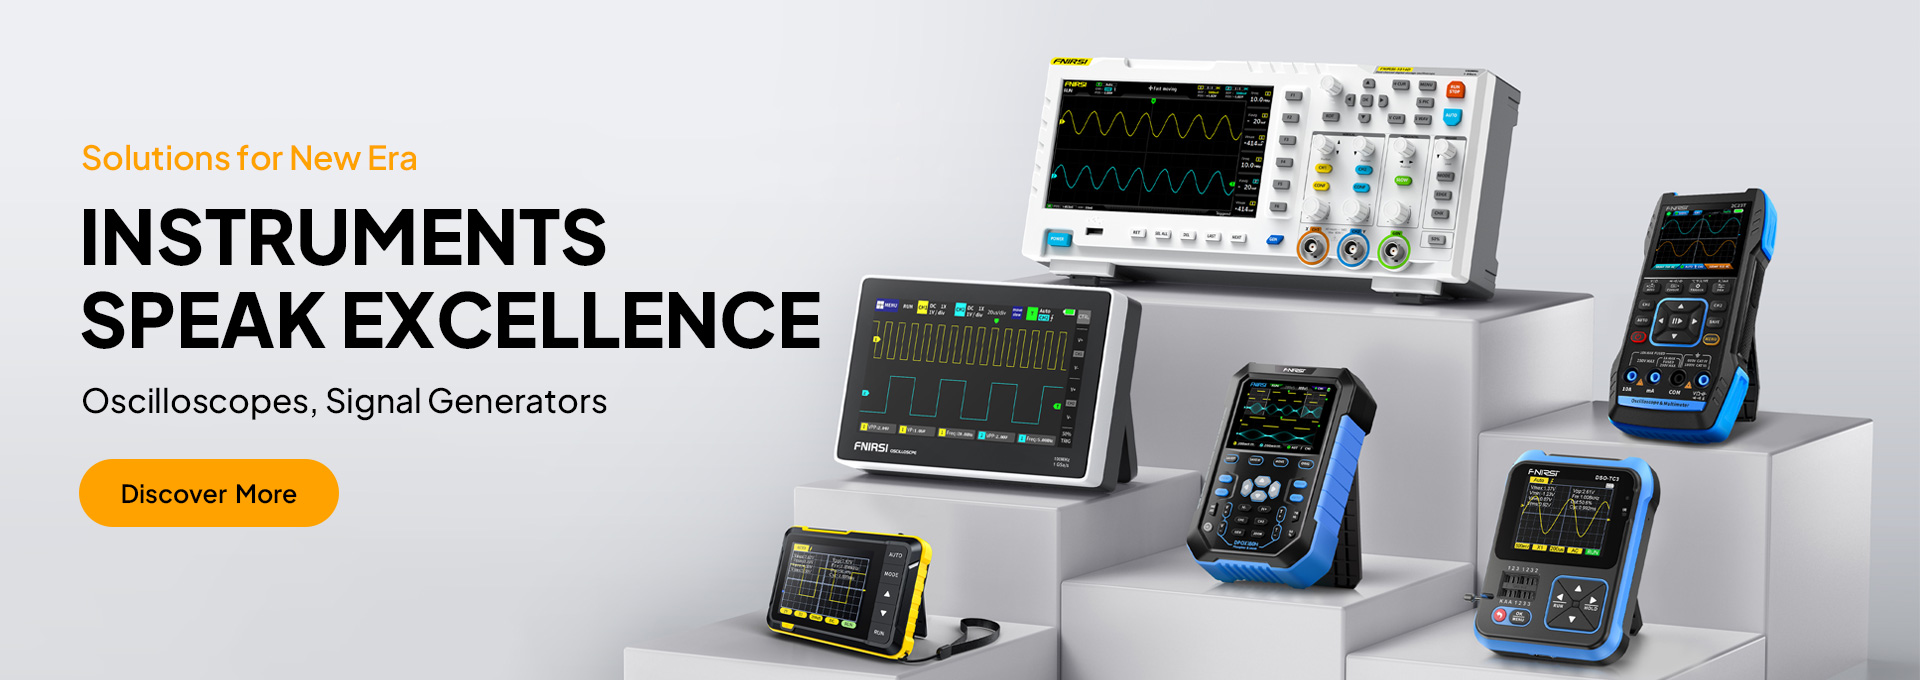 FNIRSI Oscilloscope shop banner - series product for solutions